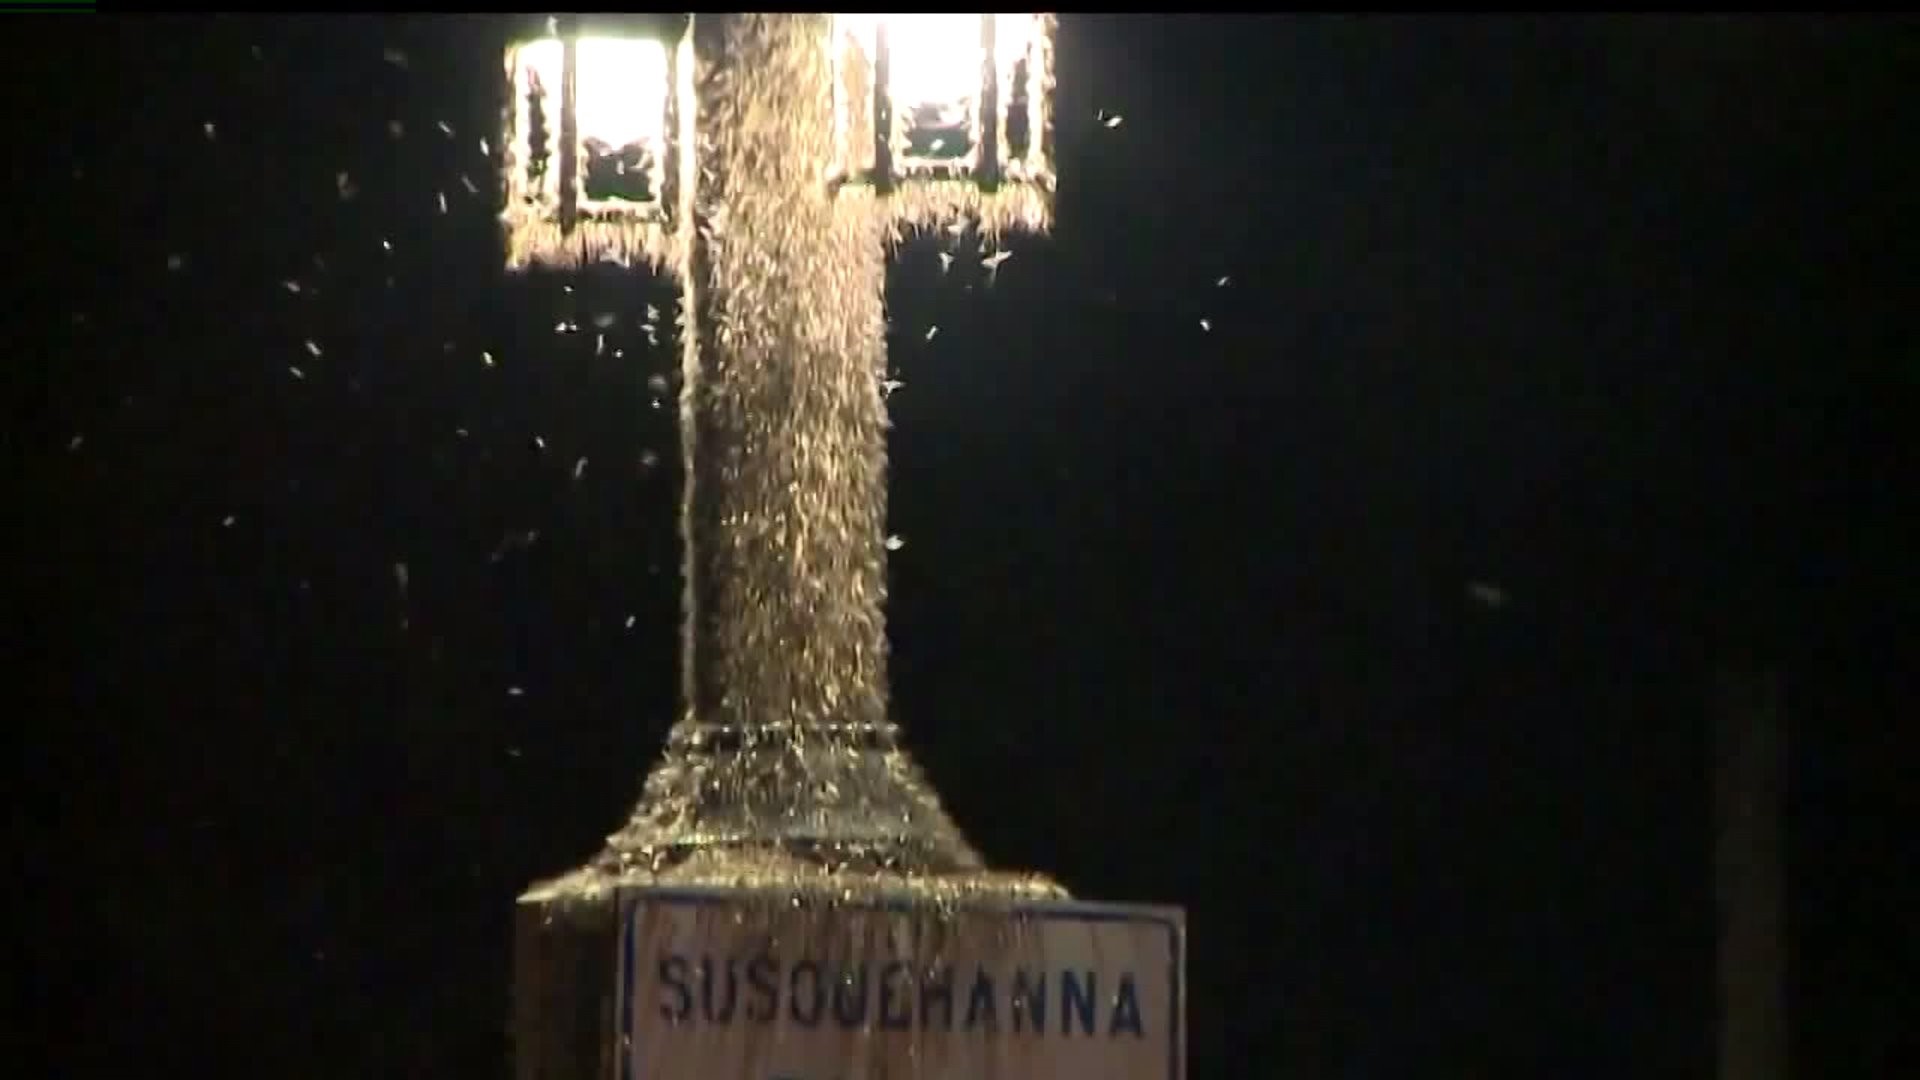 Officials shut the lights off along the Columbia Wrightsville Bridge for the return of the Mayflies